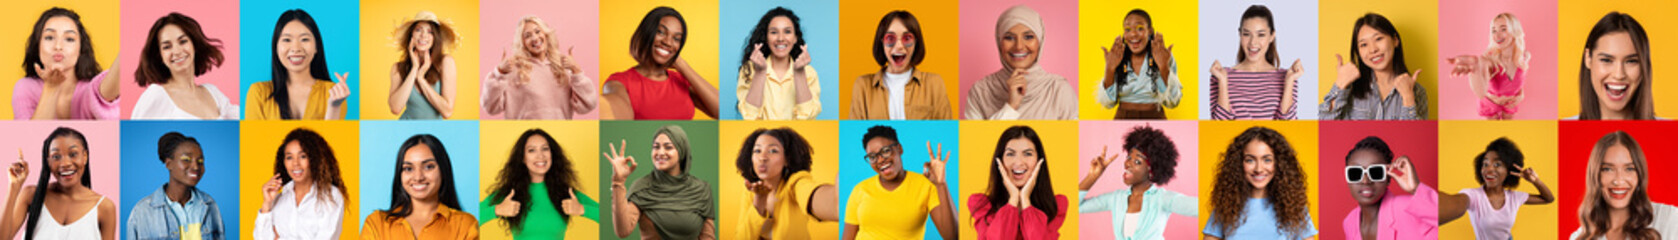 Colorful collage showing a variety of women and their reactions to different situations on colorful...